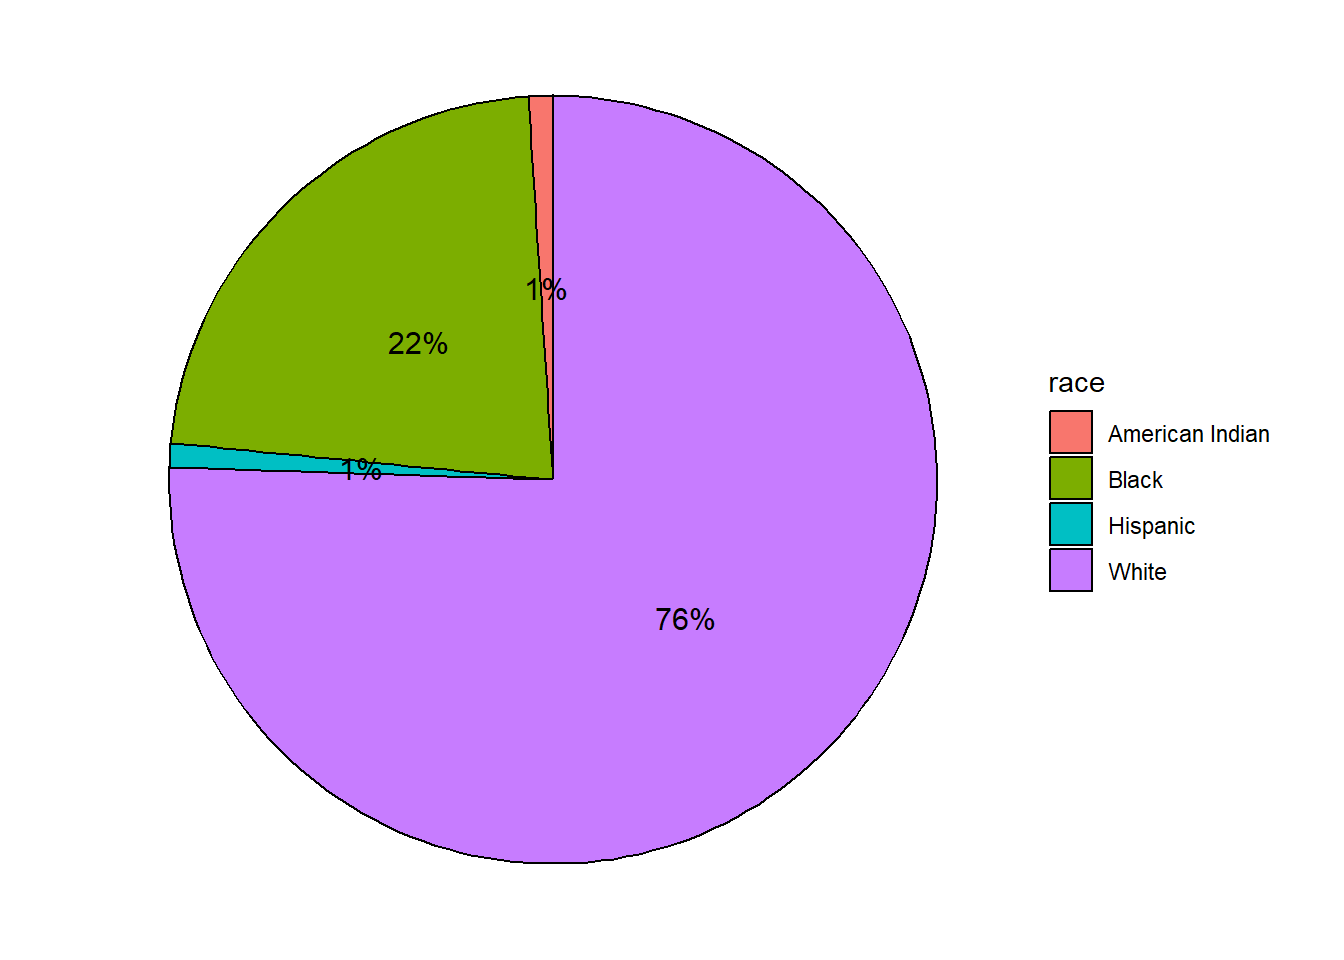 Basic pie chart with legend